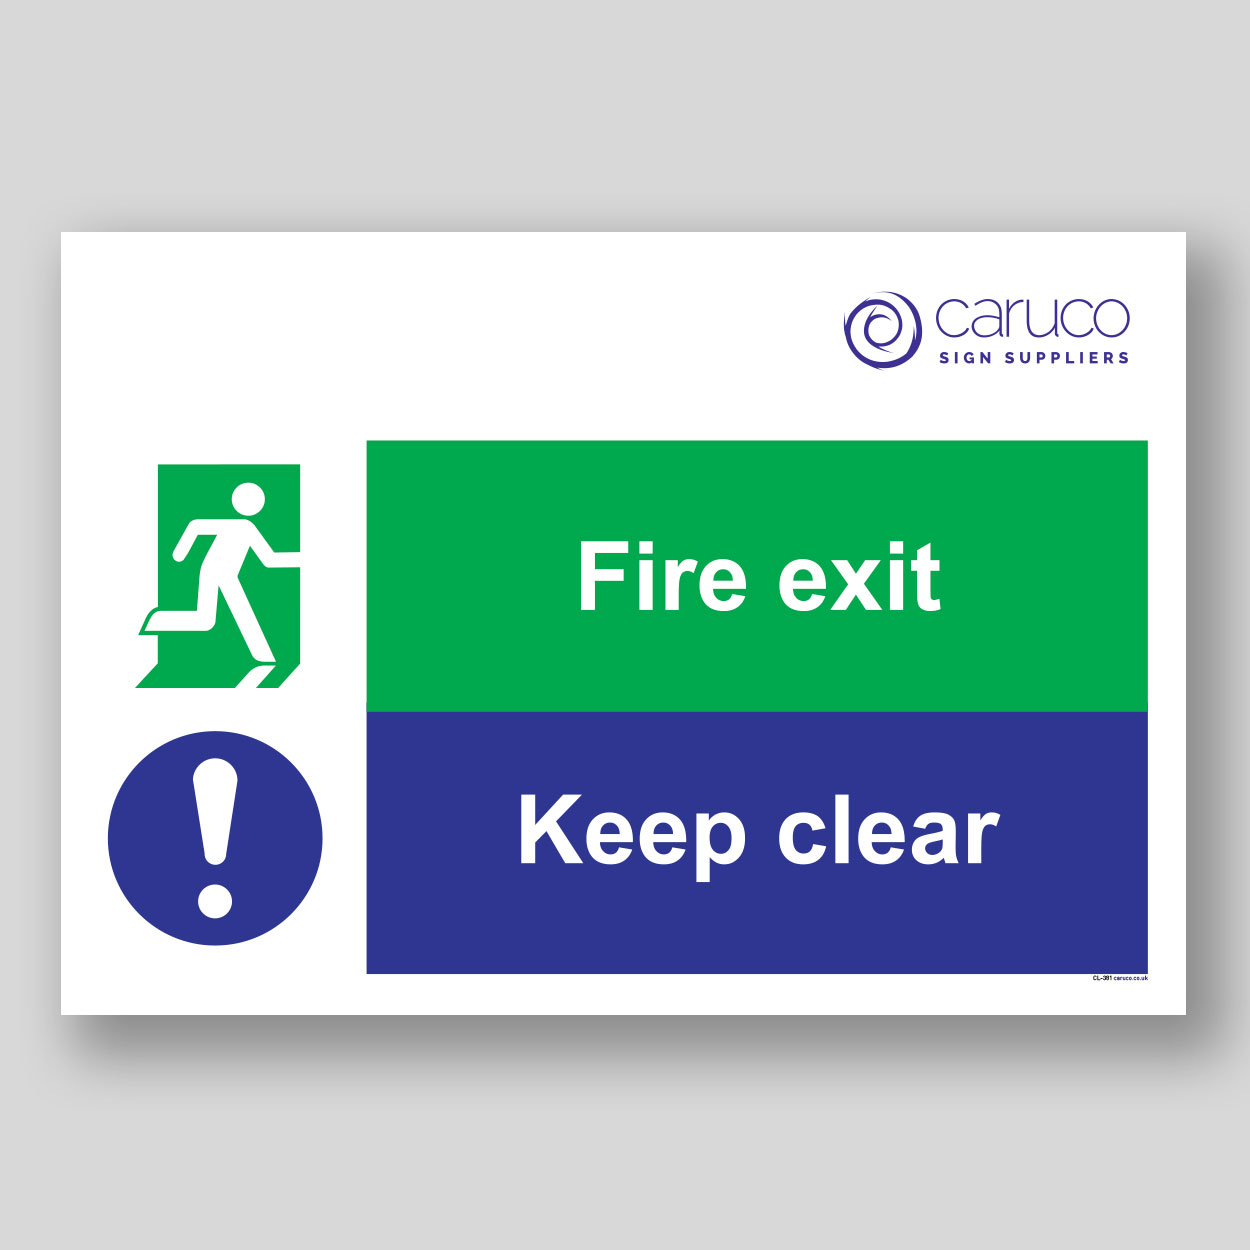 CL-381 Fire exit - Keep clear